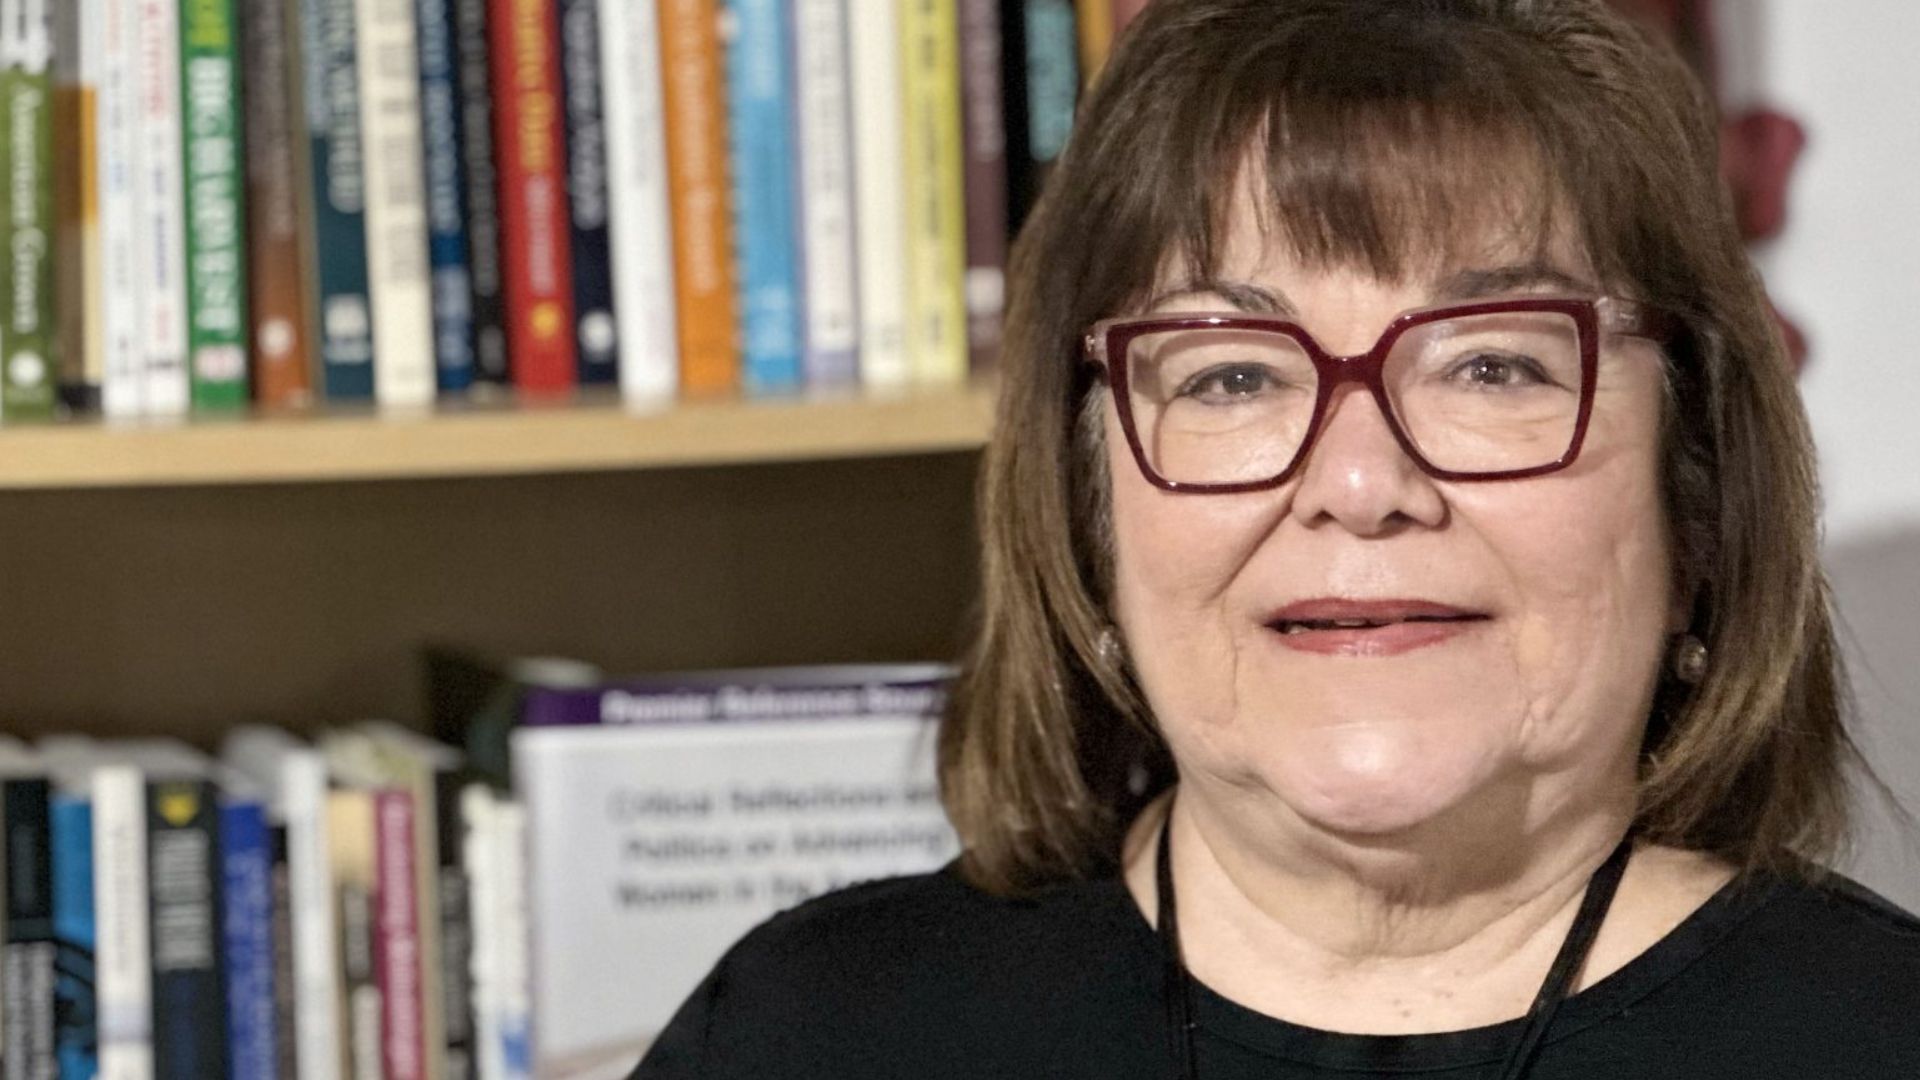 A photo of Indigenous Educational Studies prof Sheila Cote-Meek shows her sitting in front of a book shelf, smiling wearing red glasses and a black shirt. 